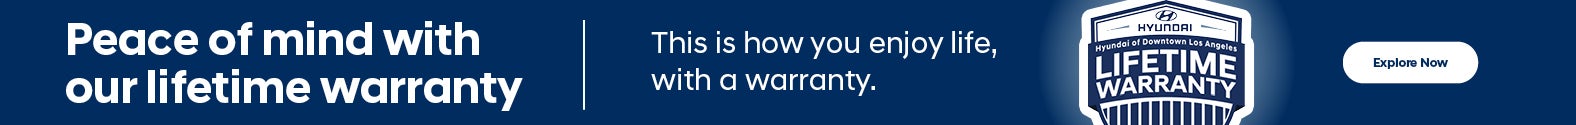 Lifetime Warranty at Hyundai of Downtown Los Angeles